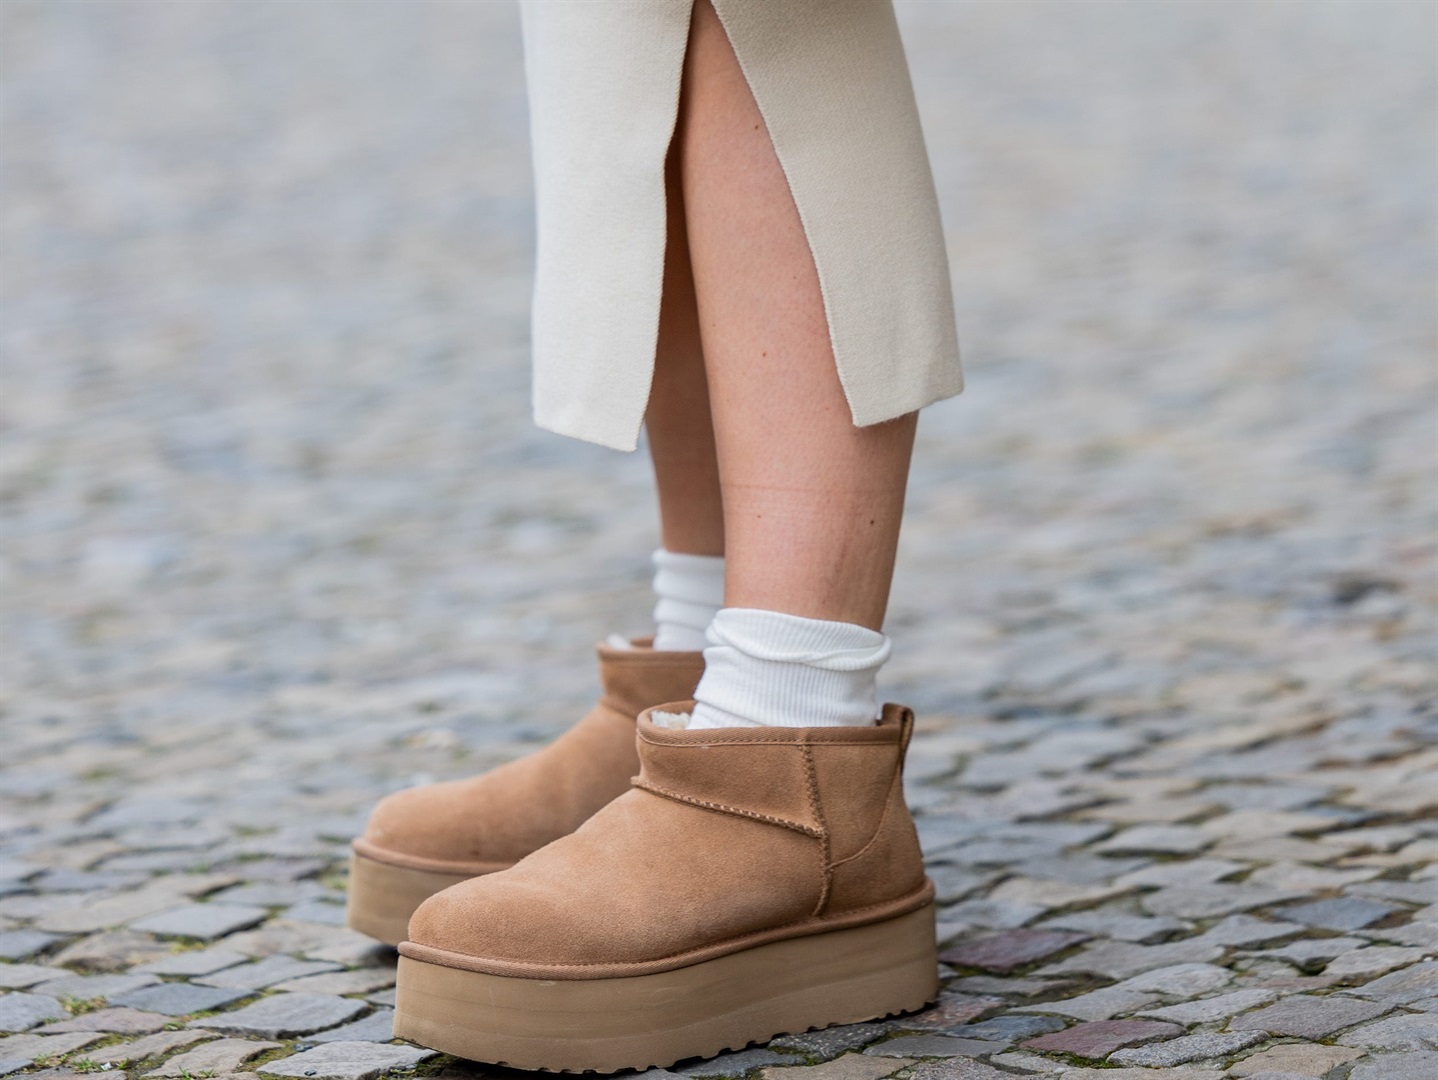 Businessinsider.co.za | Ugg boots, a fashion staple of the early 2000s, are cool again thanks to Gen Z and Kylie Jenner